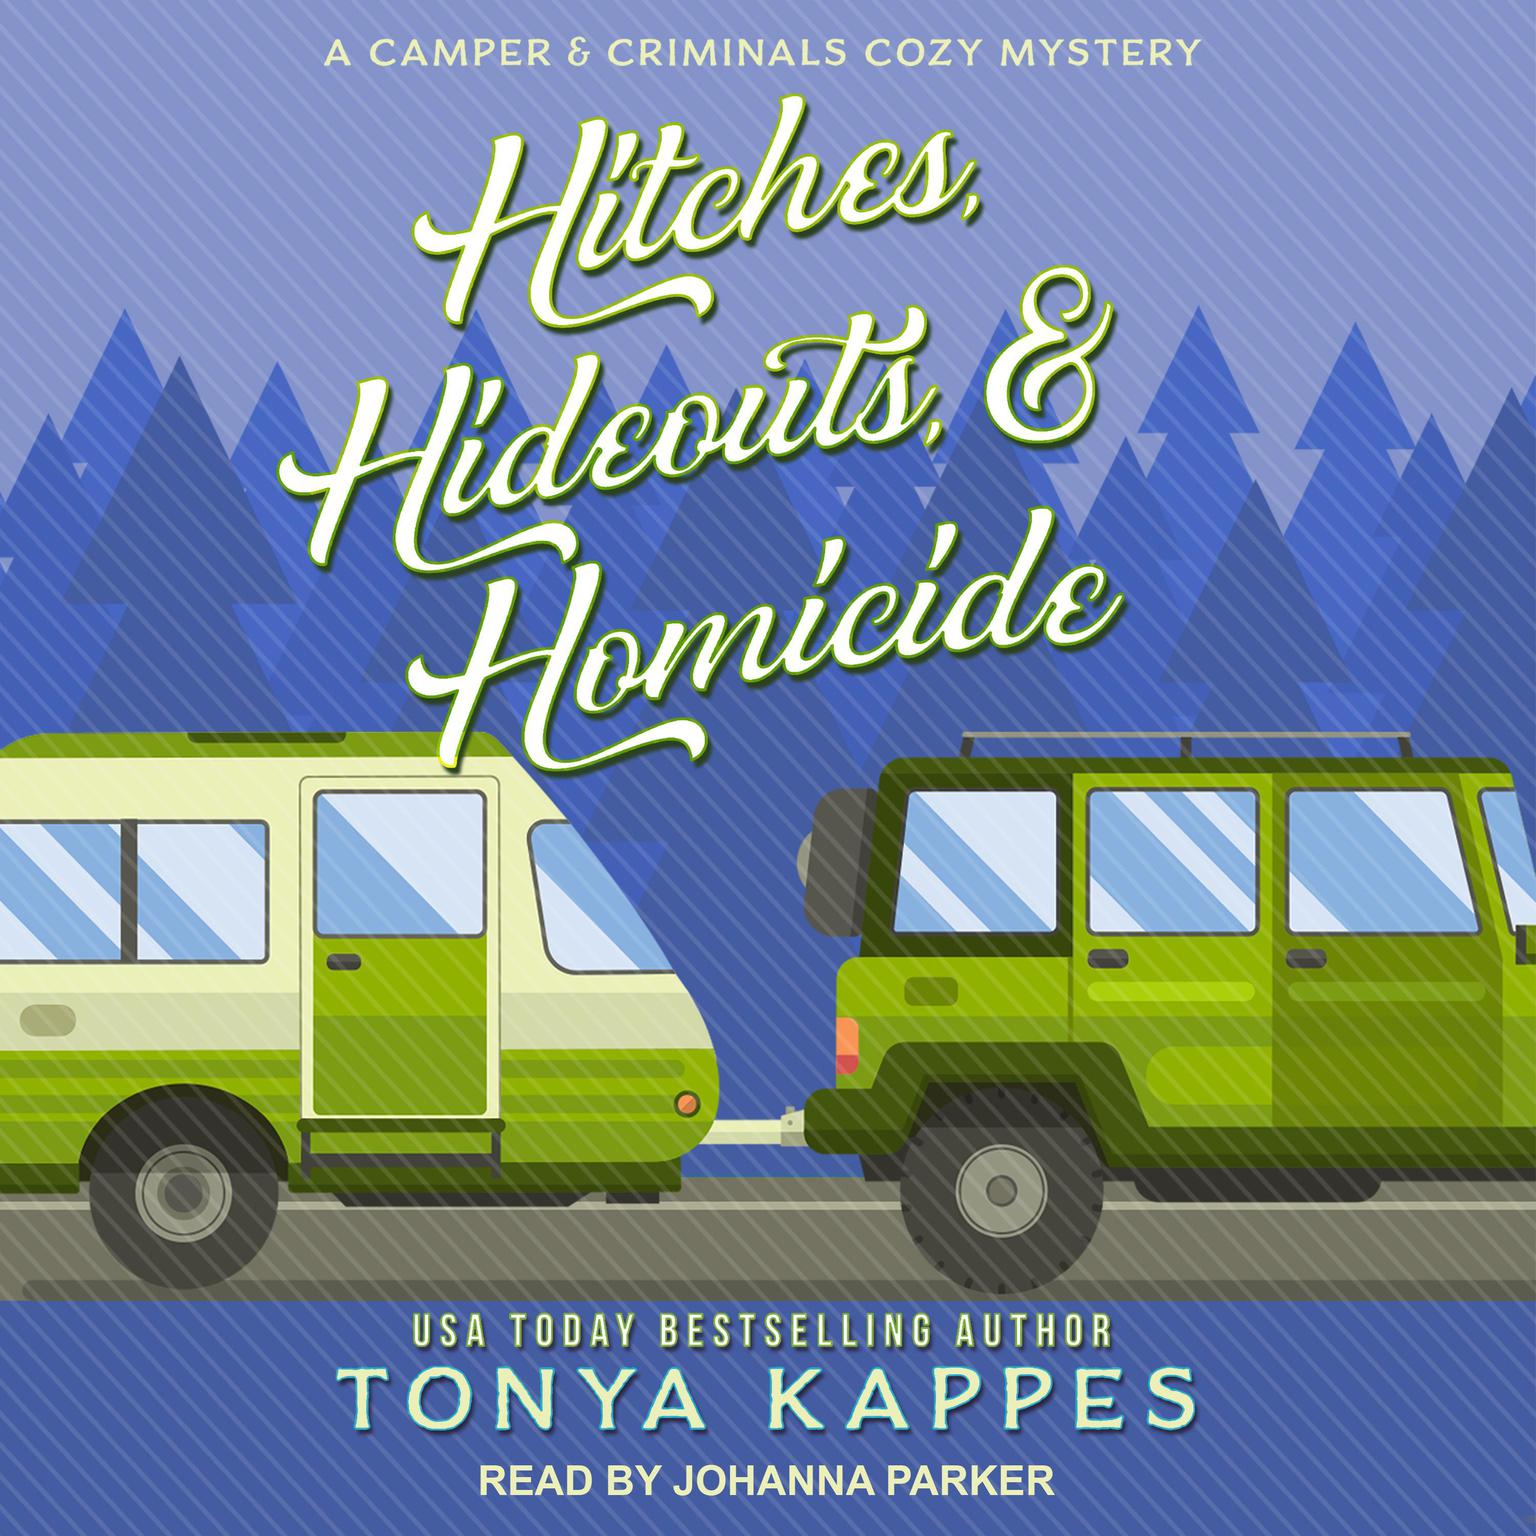 Hitches, Hideouts, & Homicide Audiobook, by Tonya Kappes